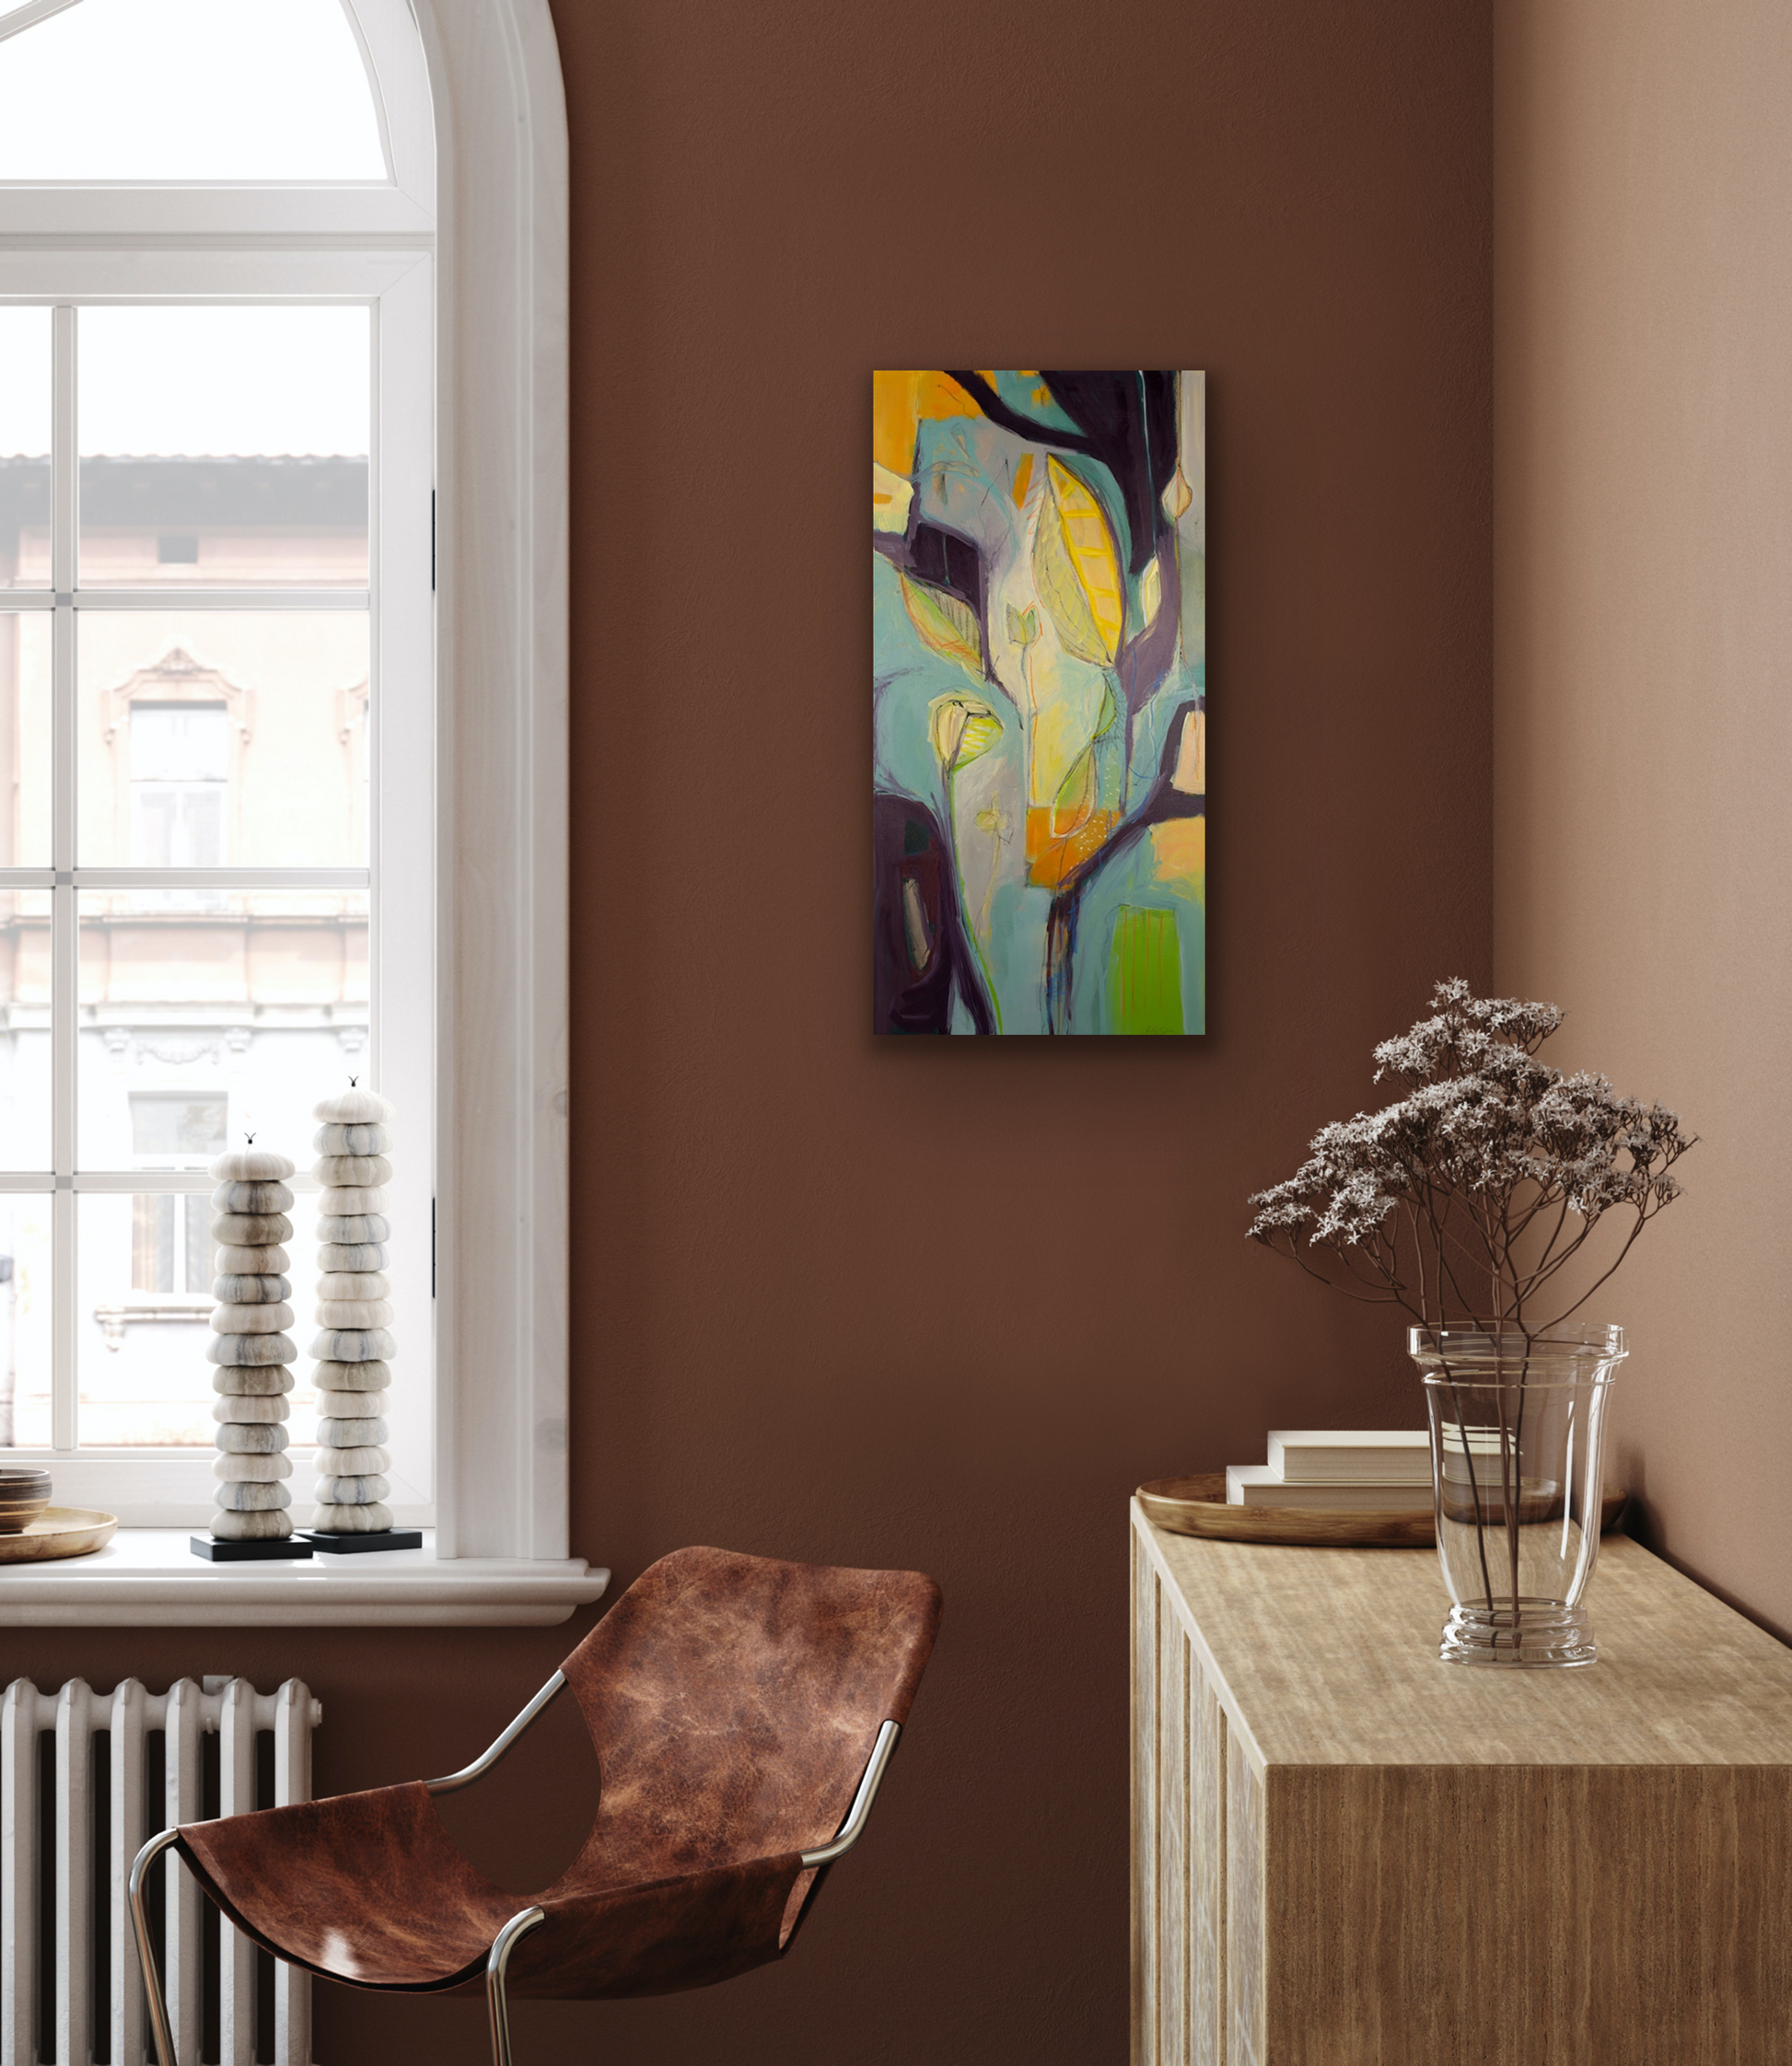 Serenity abstract wall art comes in four sizes to fit your wall perfectly.